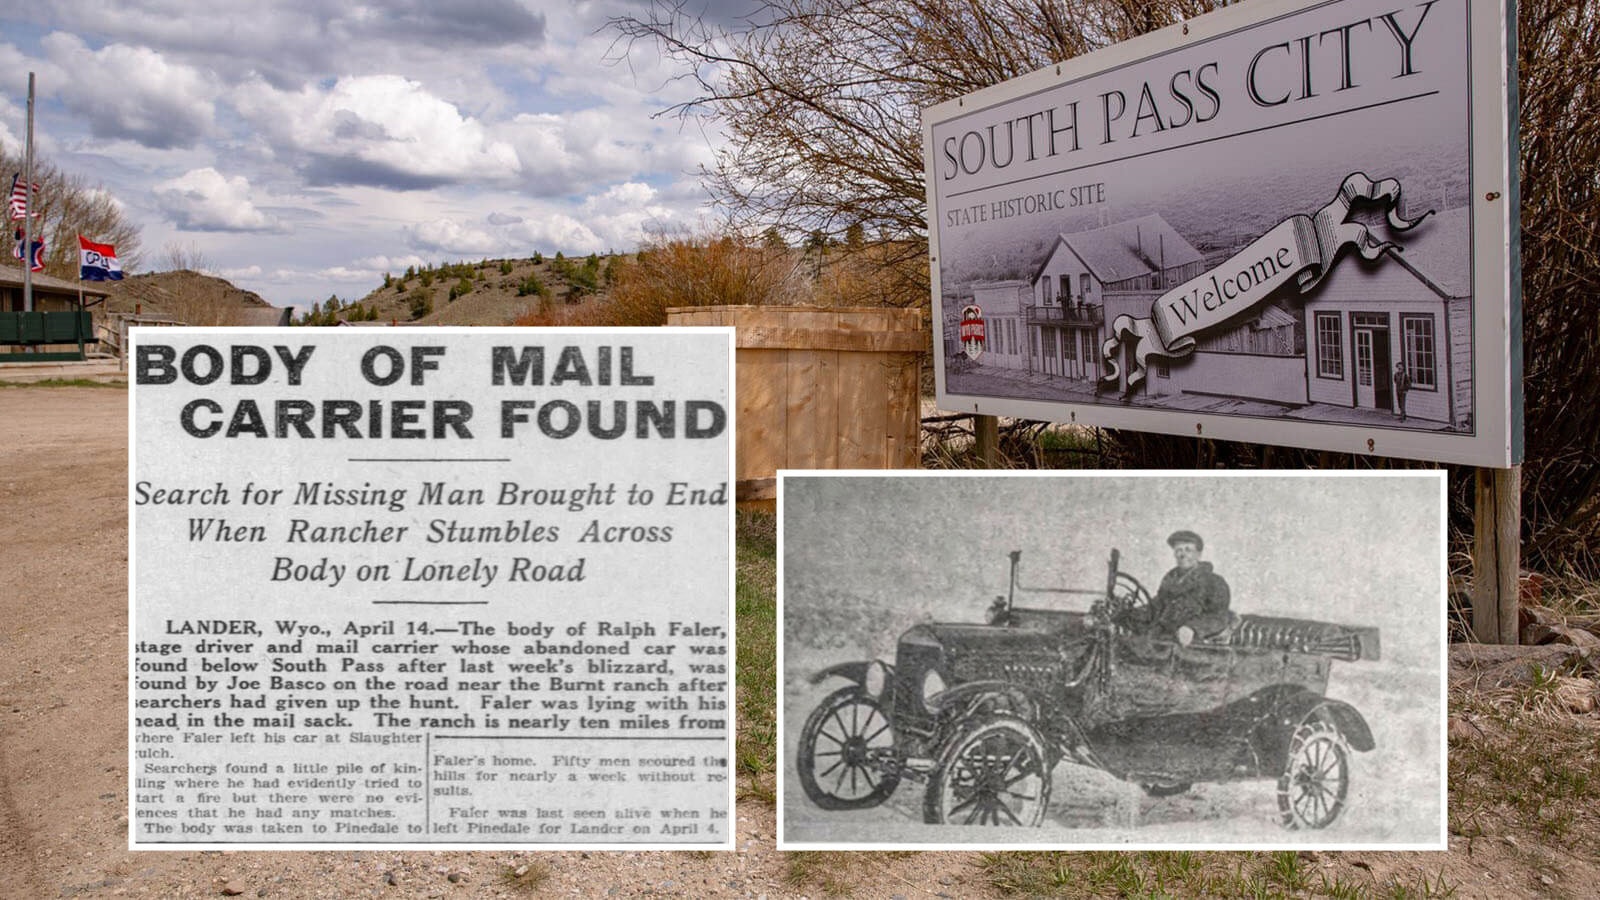 A simple marker in the middle of nowhere between Pinedale and South Pass City, Wyoming, tells of the death of Ralph Faler on April 5, 1921. He was caught in a blizzard delivering the U.S. mail.